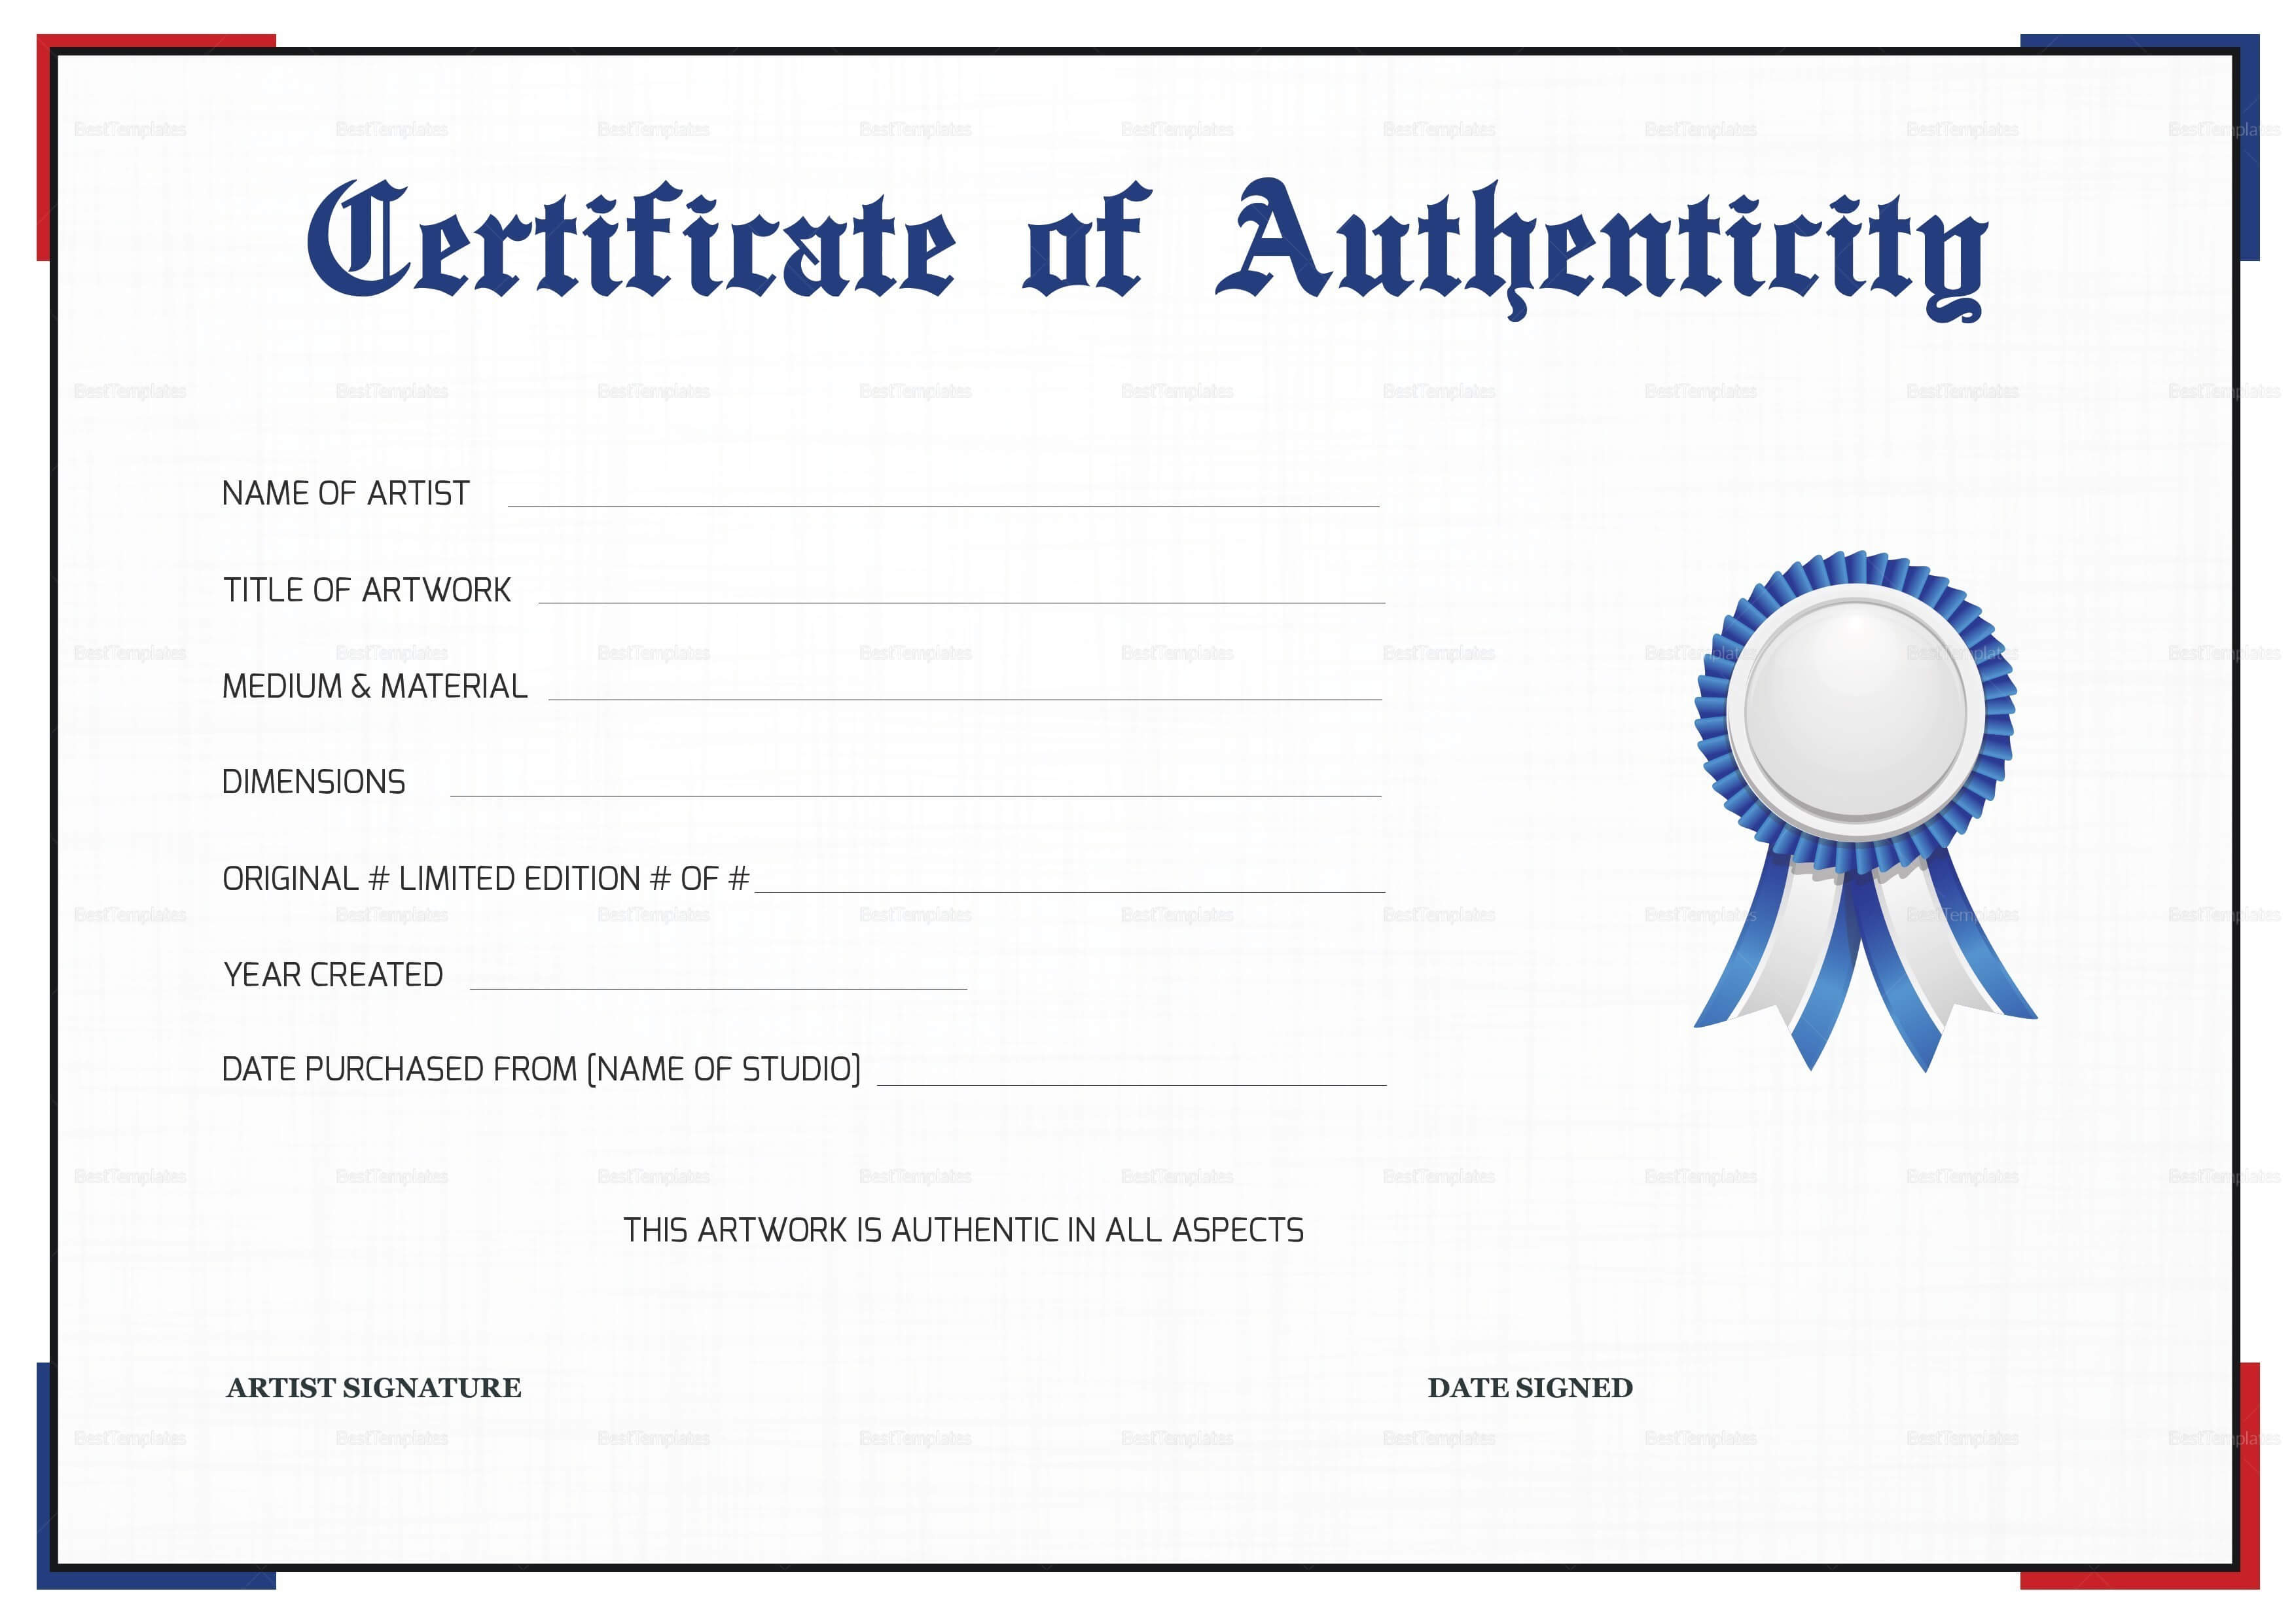 011 Certificate Of Authenticity Artwork Template Resume Art Within Free Art Certificate Templates